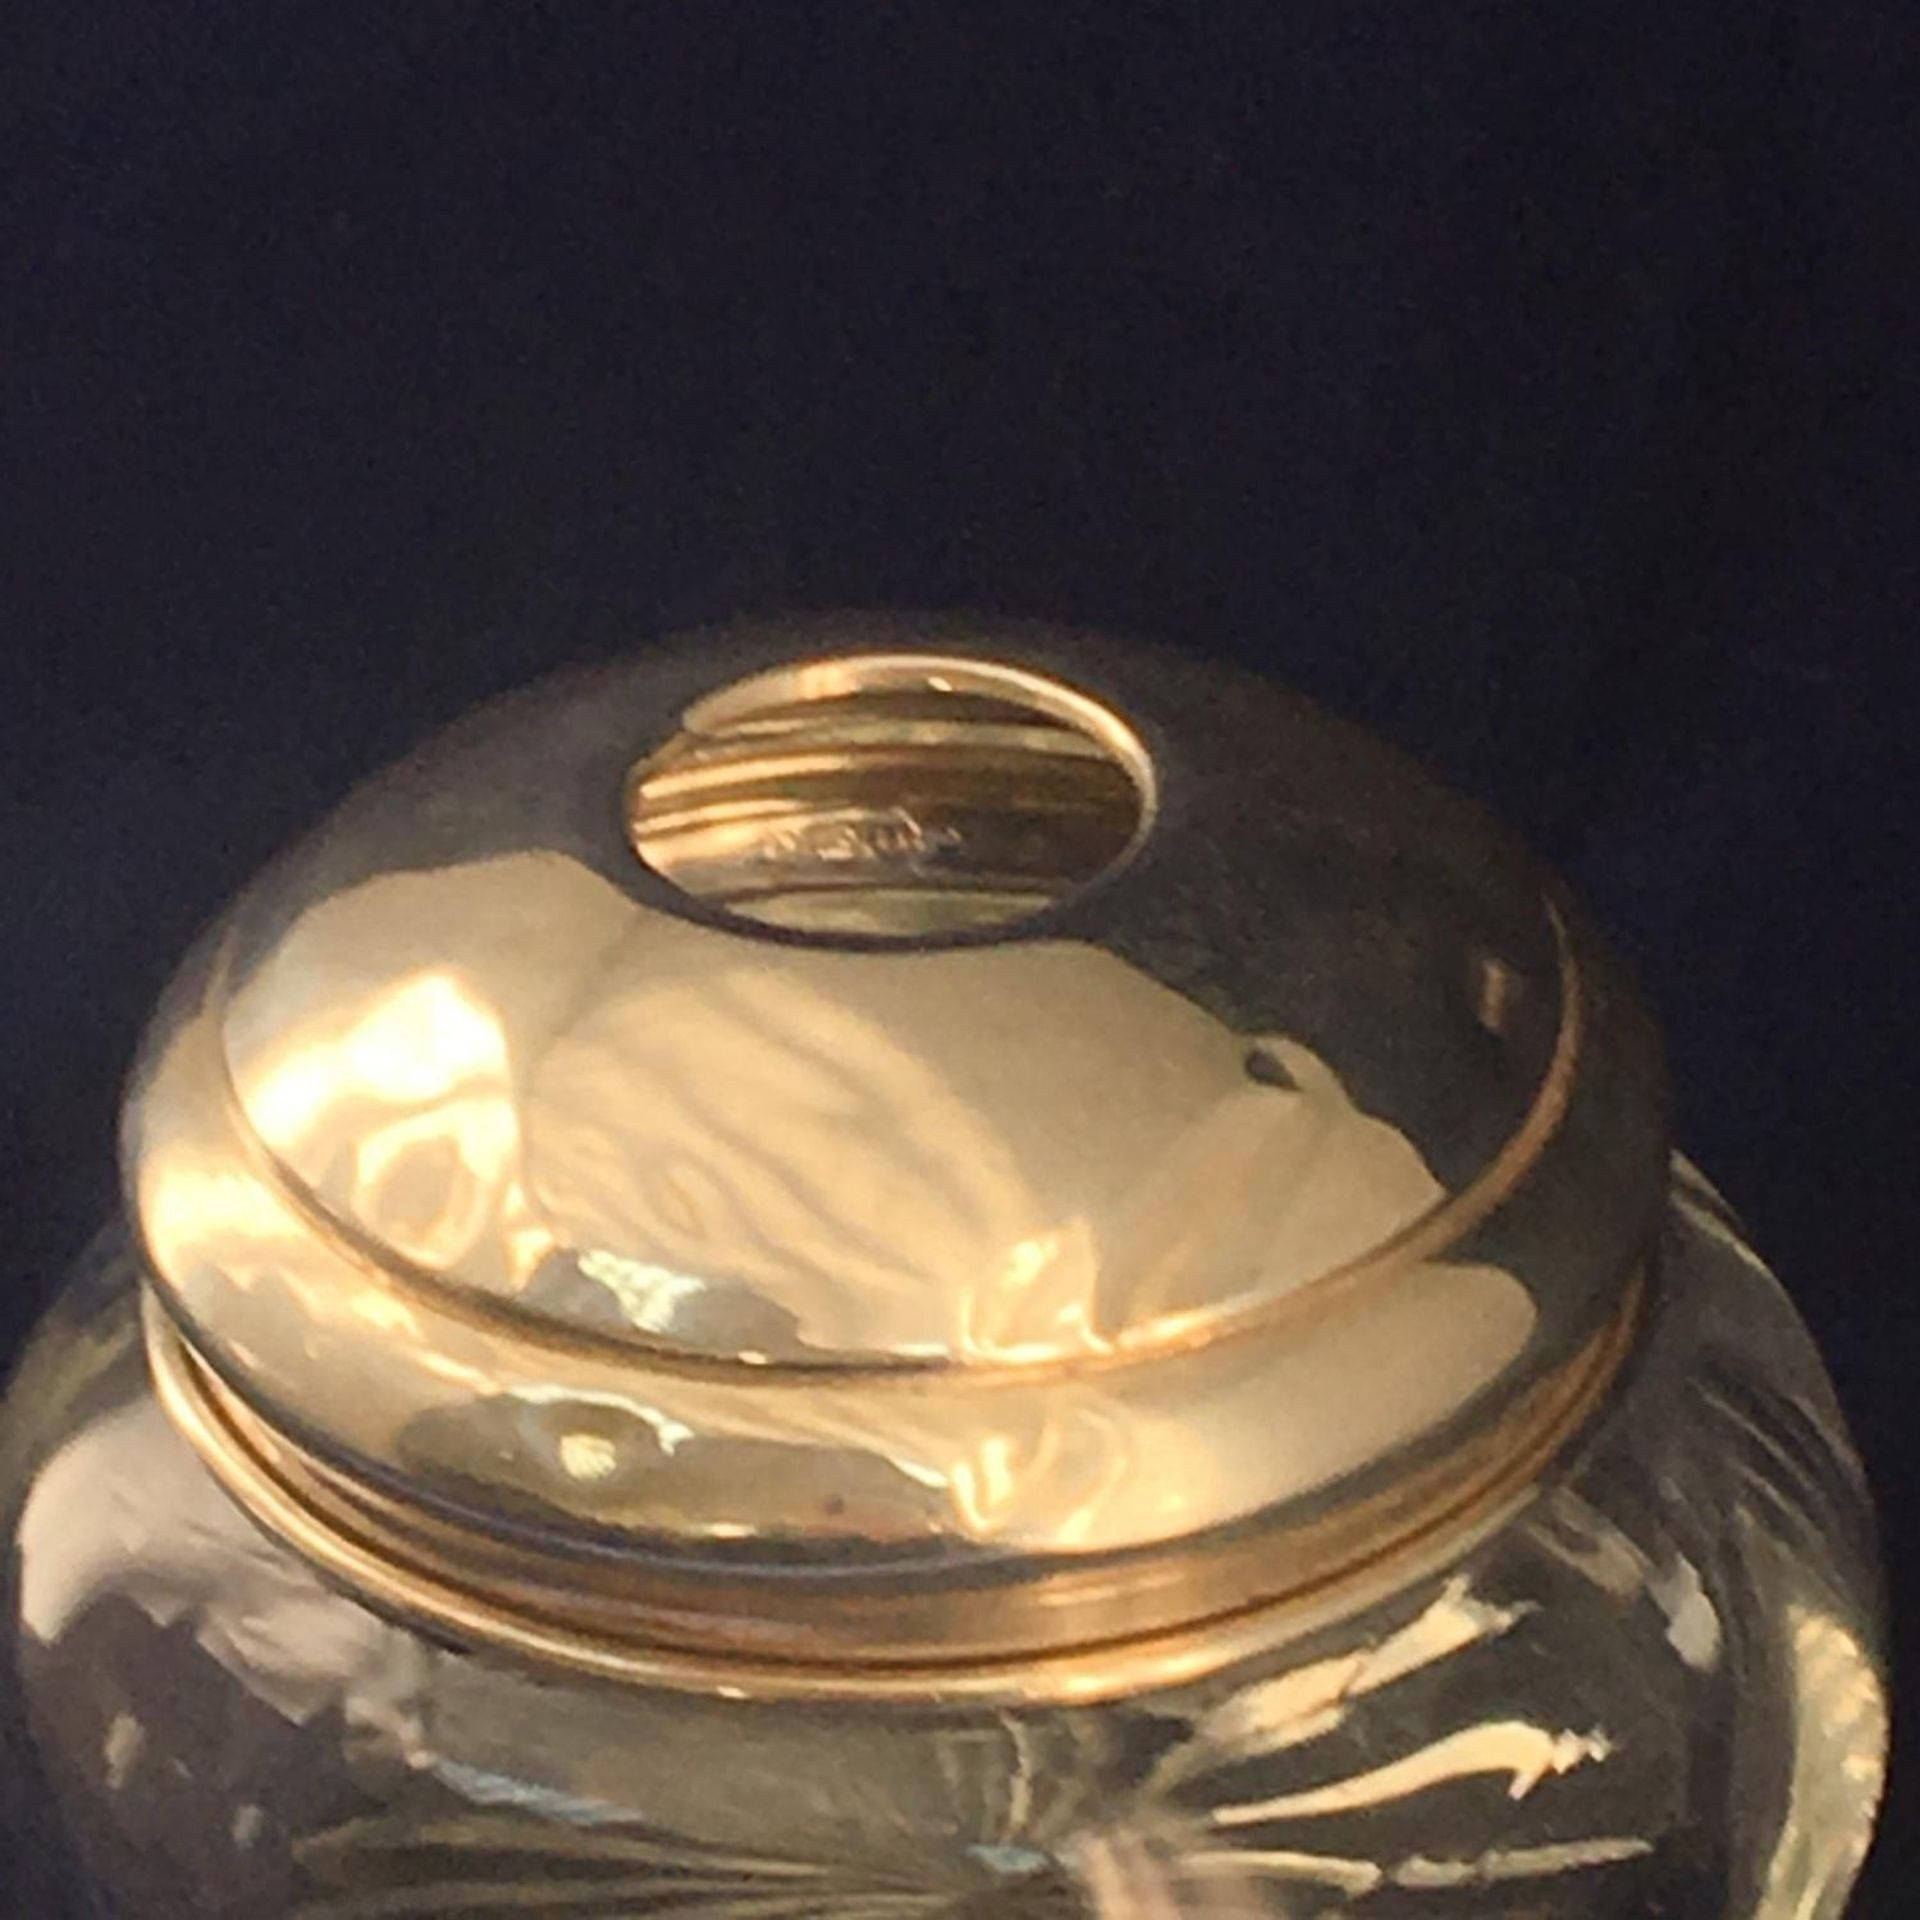 Art Deco 1920s Dressing Table jar with HM solid sterling silver lid - 1925 - Image 2 of 3